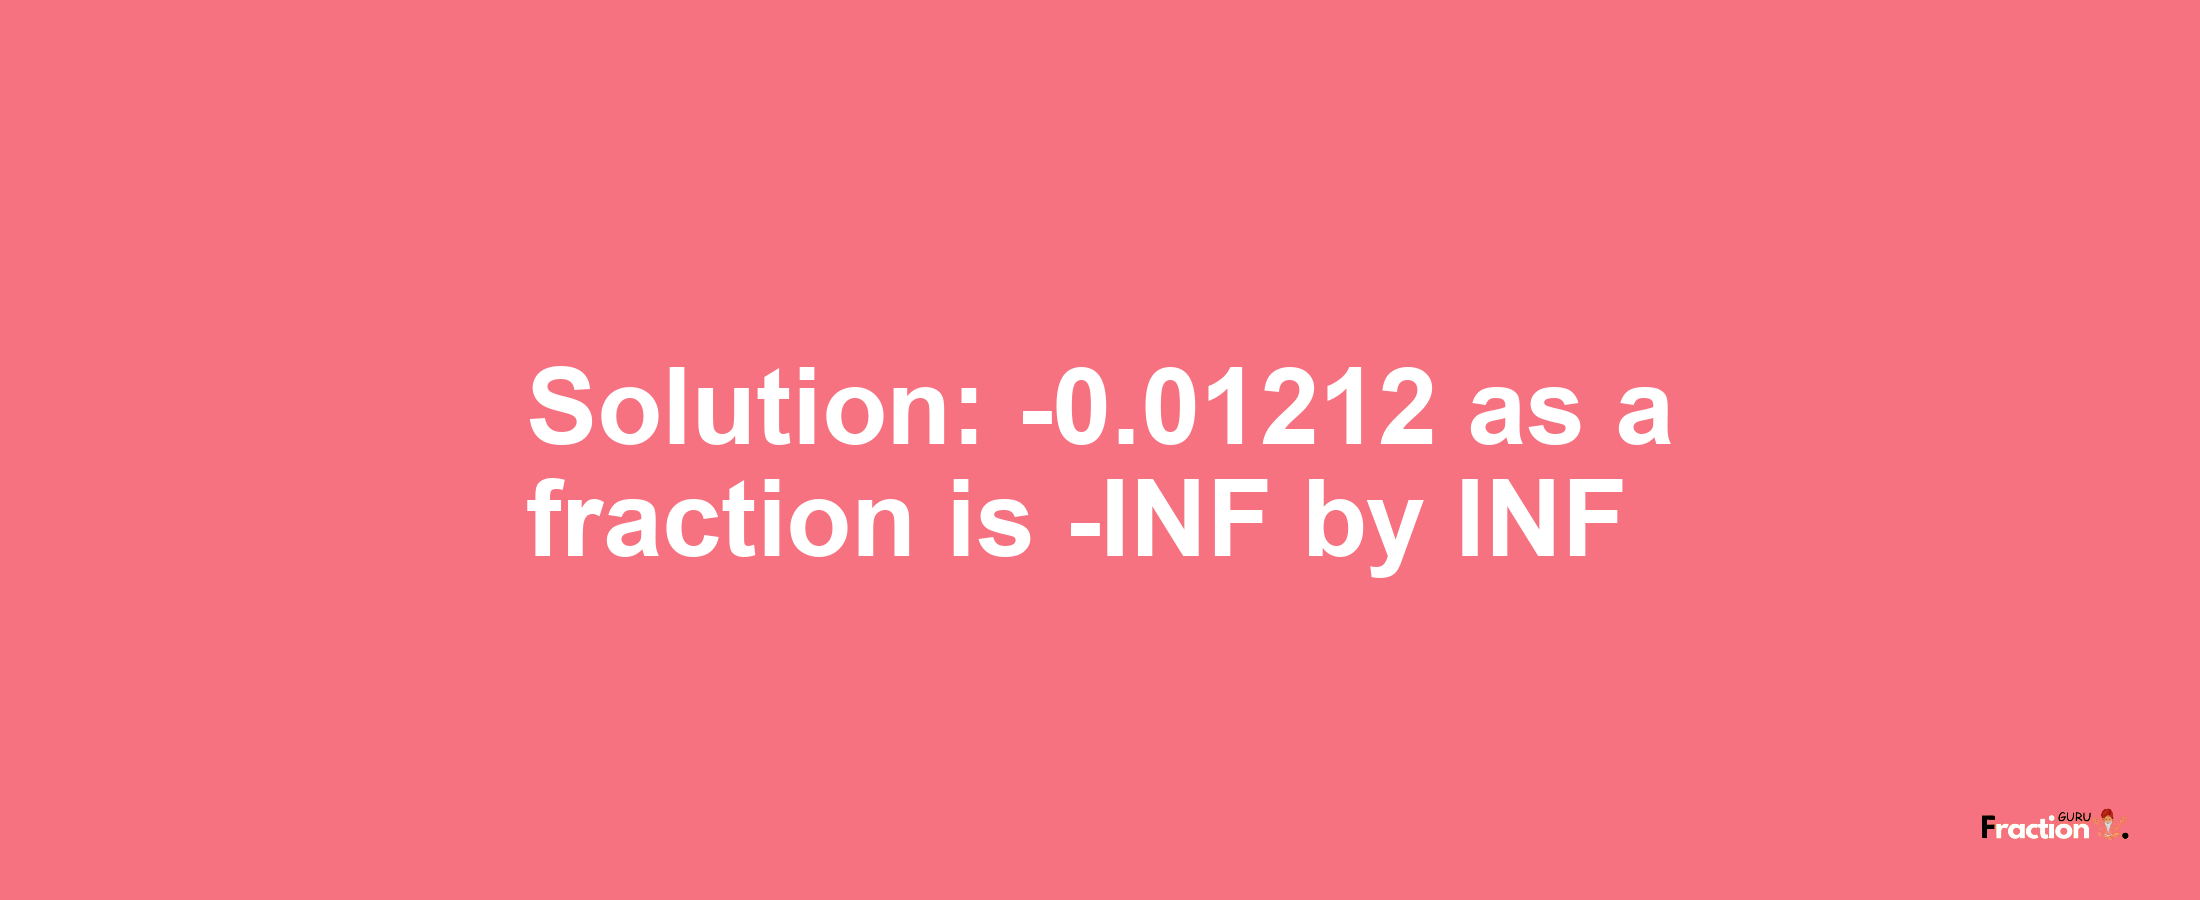 Solution:-0.01212 as a fraction is -INF/INF